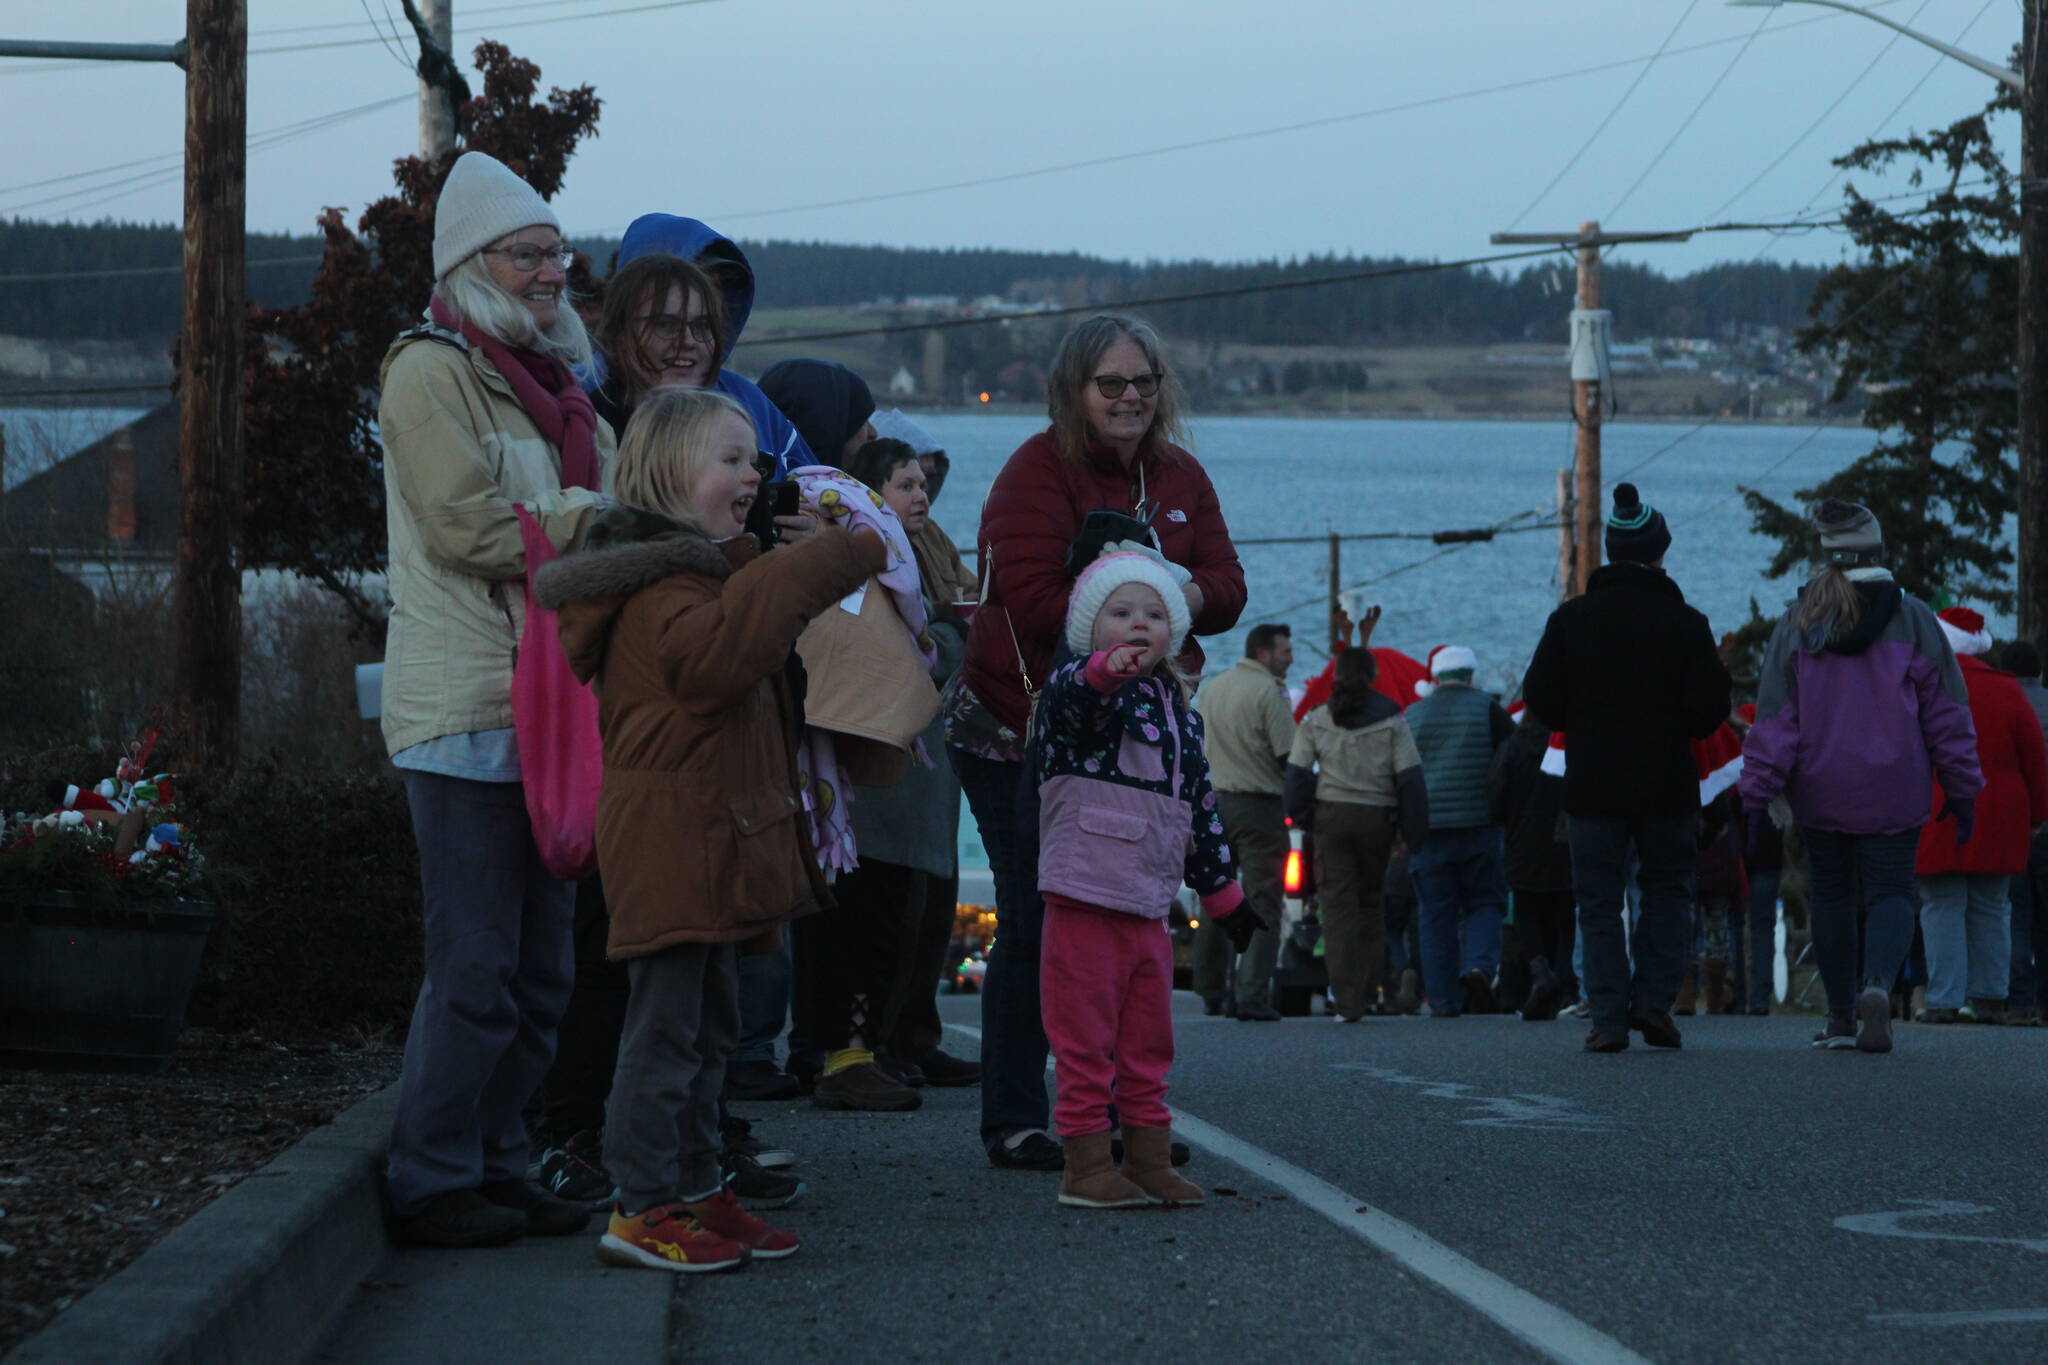 Photo by Karina Andrew/Whidbey News-Times
Paul Stanwood, age 6, and Riley Merryman, 3, eagerly await the appearance of Santa Claus in the Coupeville parade.